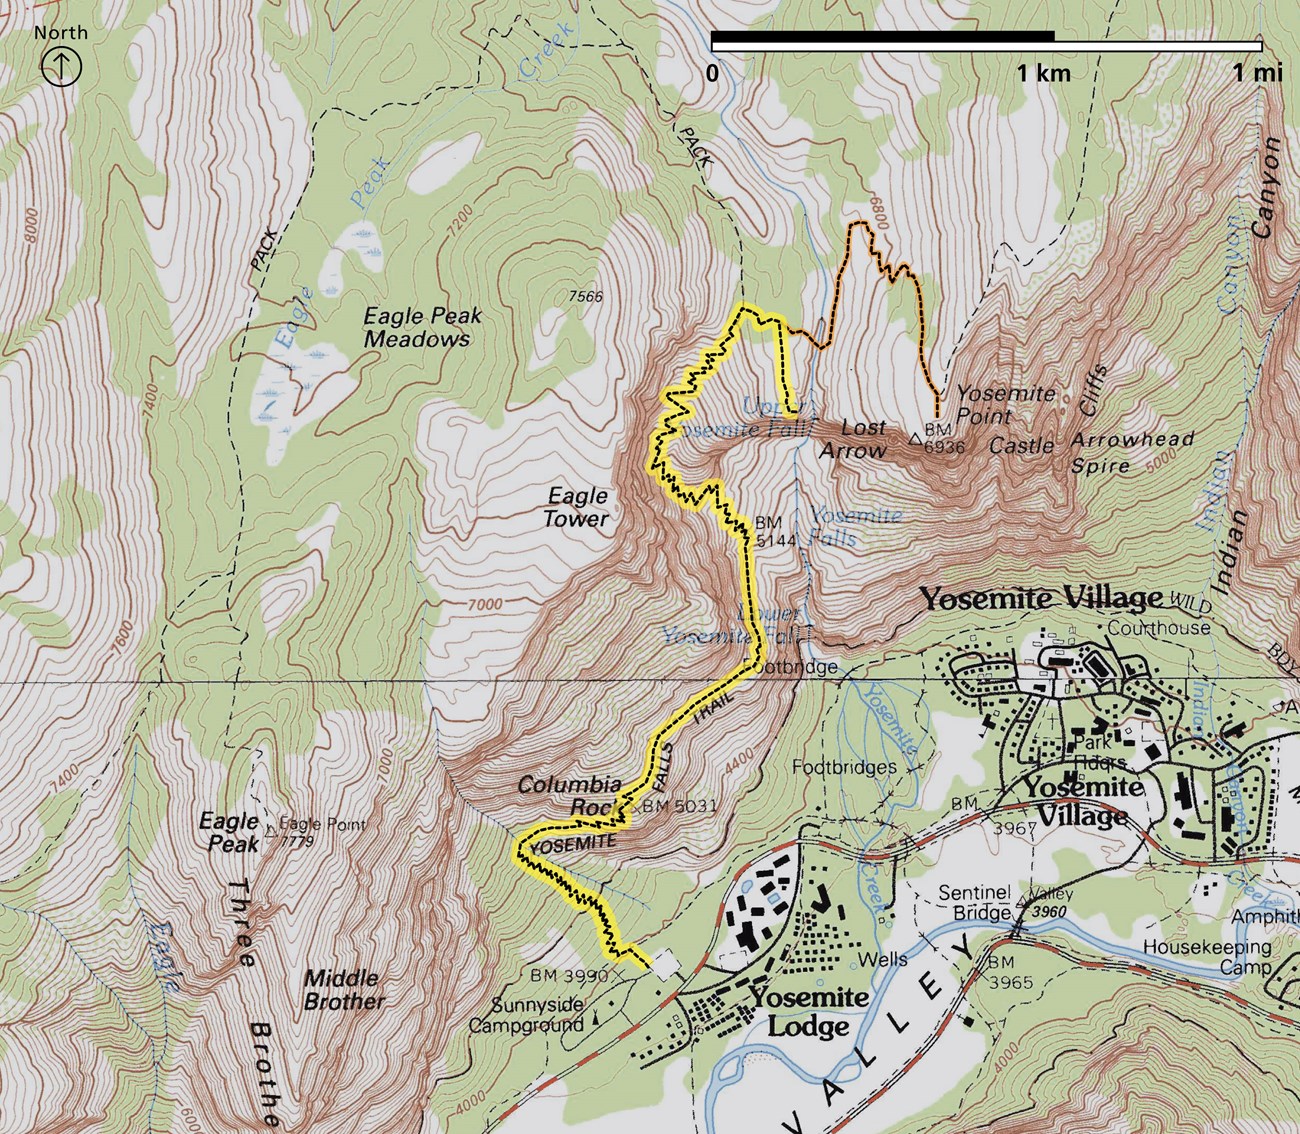 Map showing trail to Yosemite Falls and beyond to Yosemite Point, which gaines around 3,000 feet mostly through a series of switchbacks